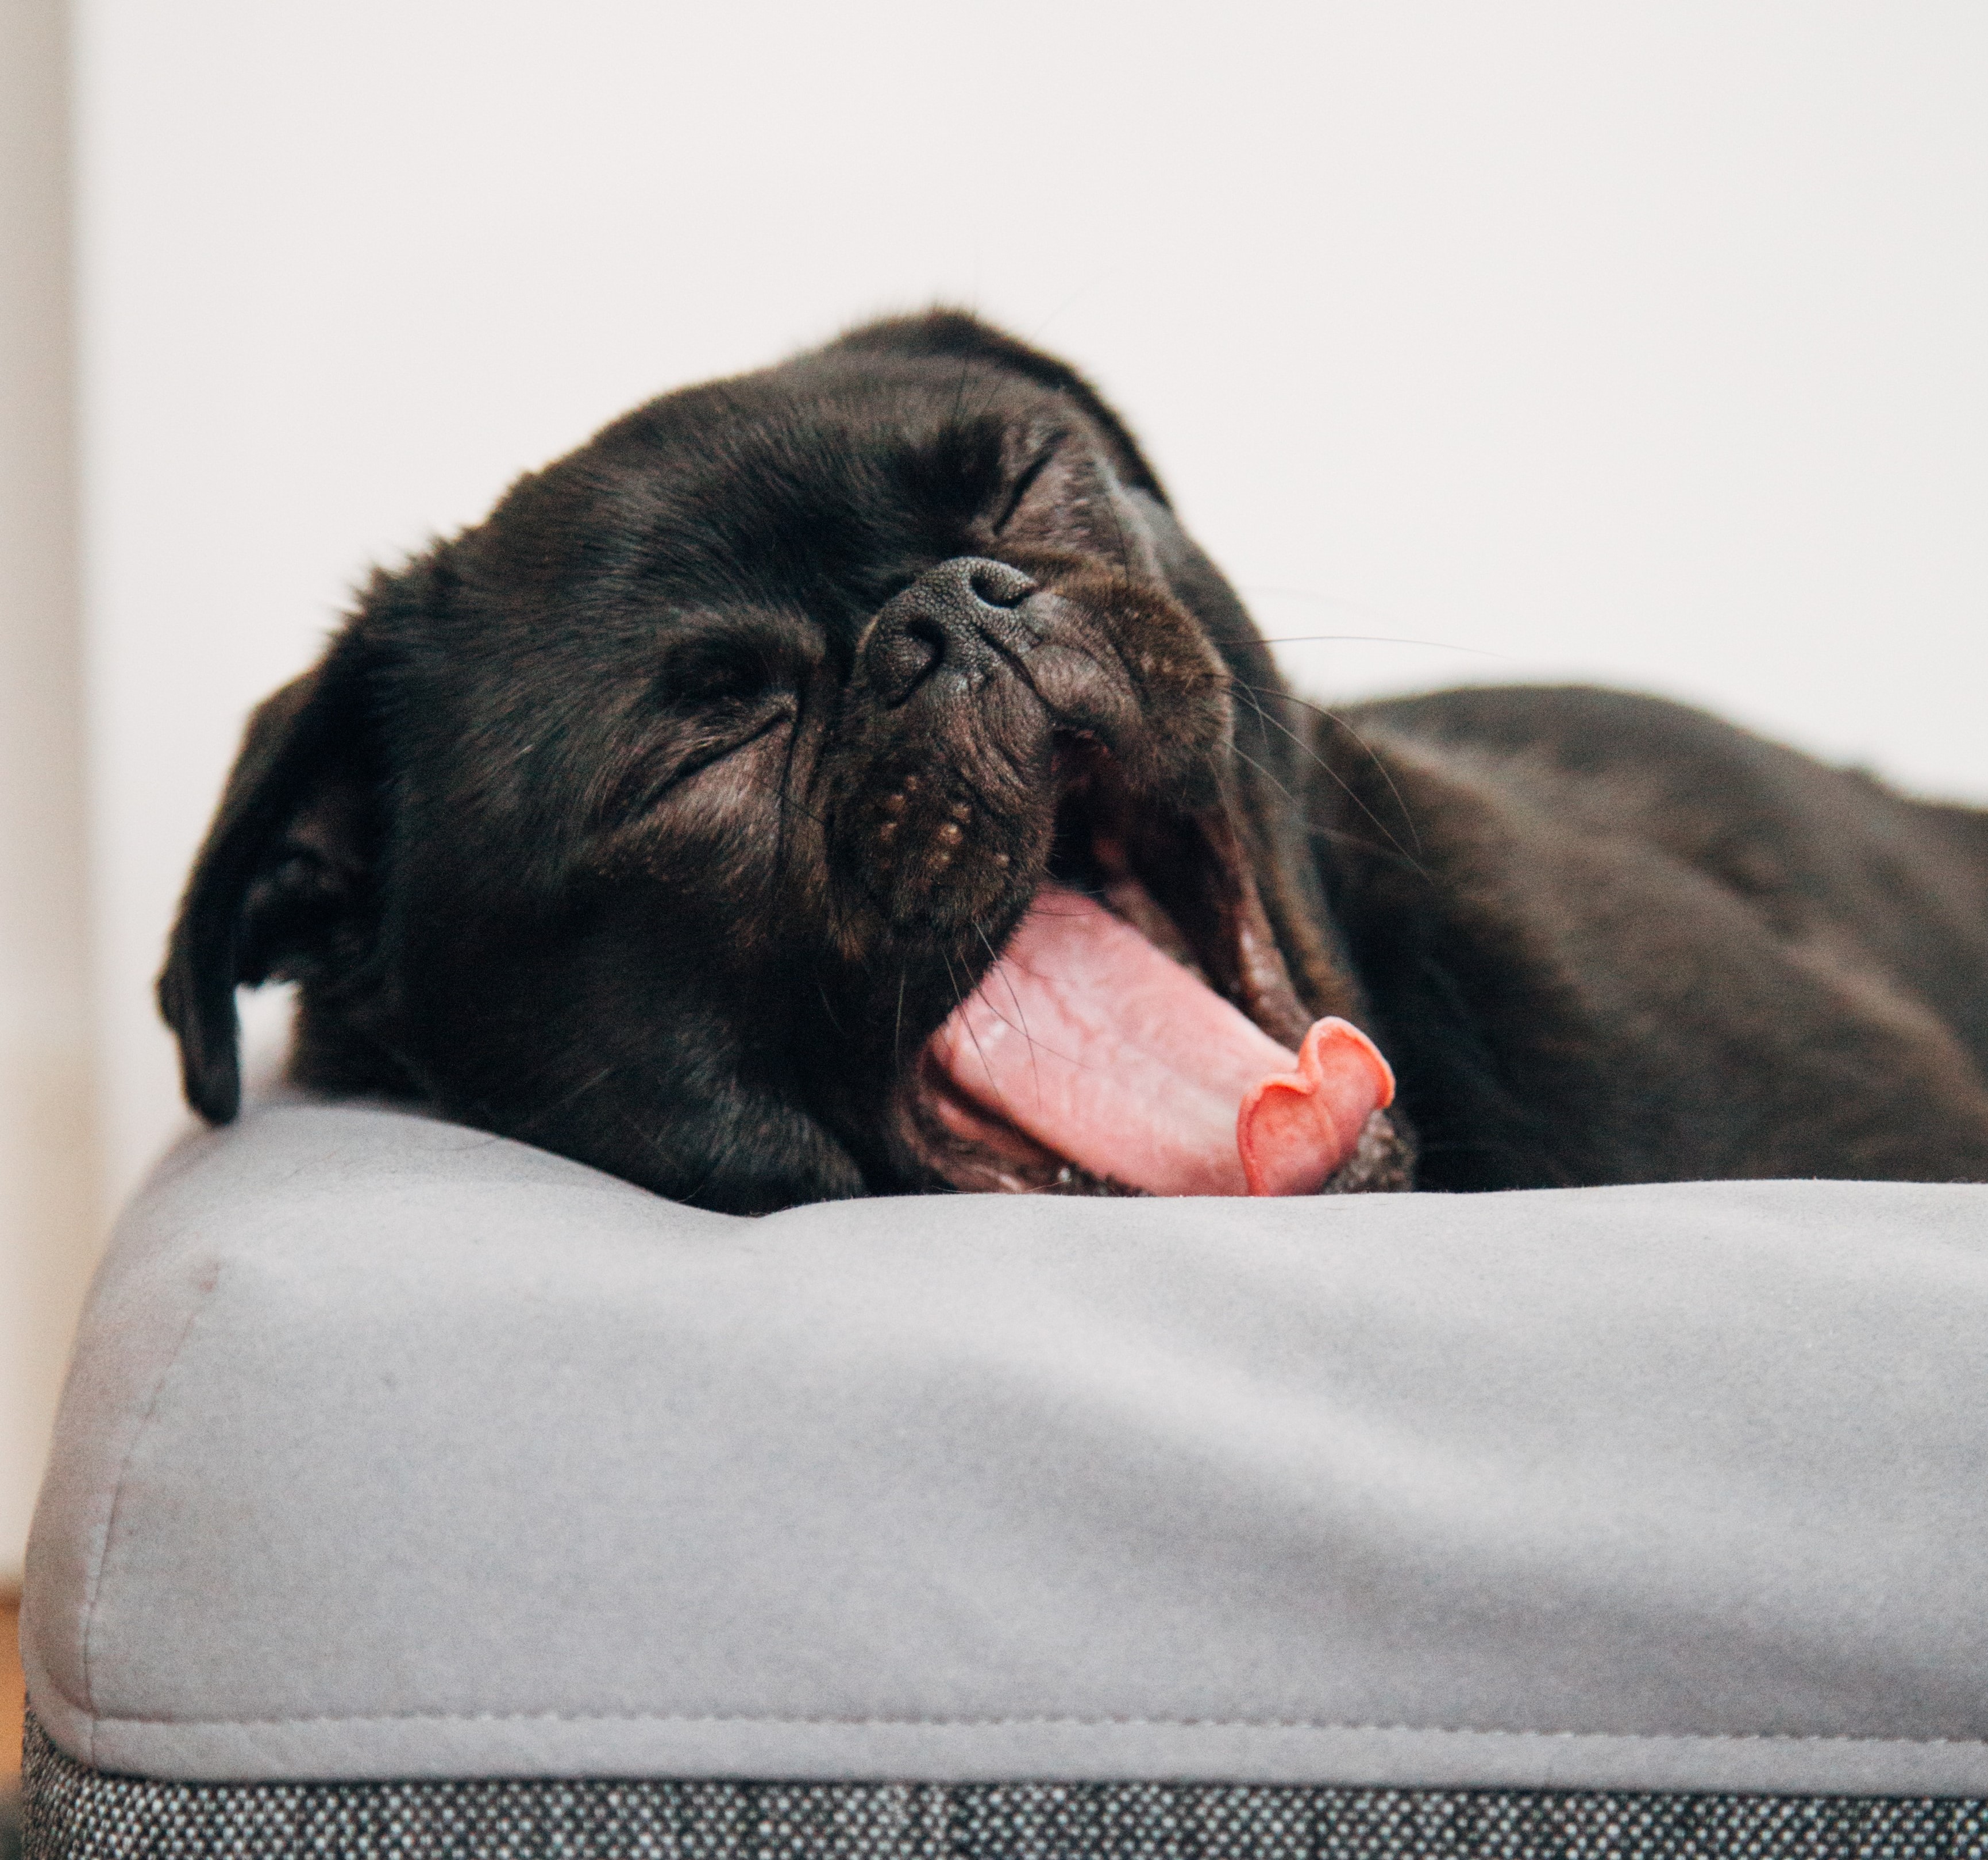 Pugs require a lot of down-time. Source: Charles PH on Unsplash